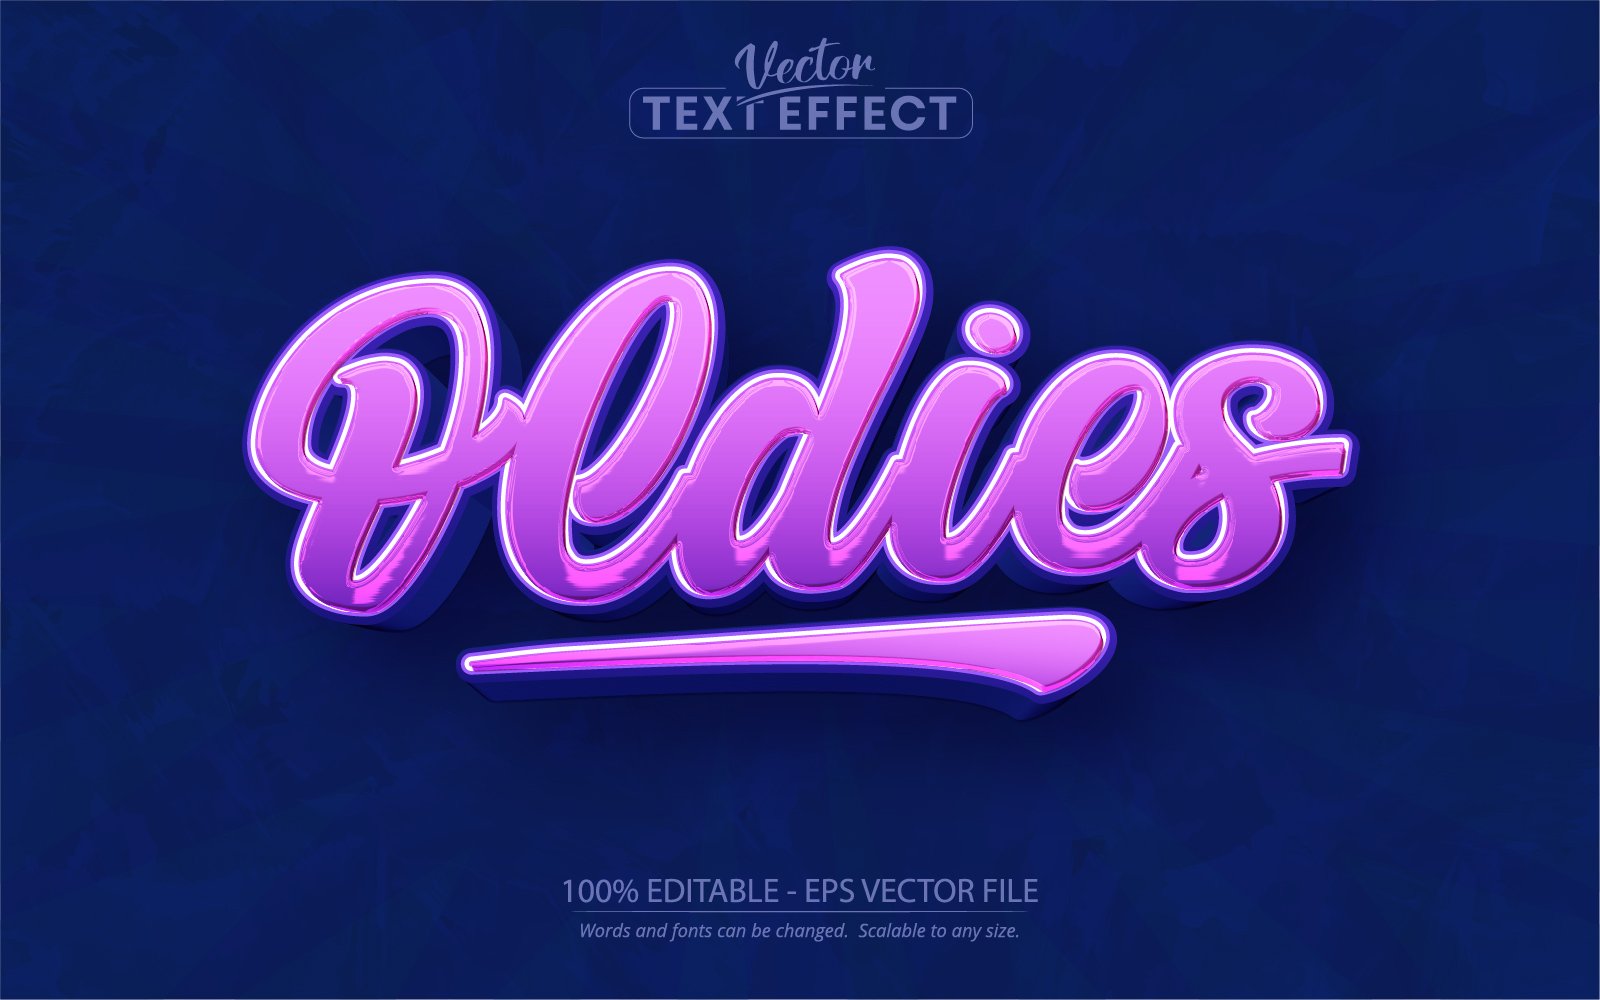 Oldies - Editable Text Effect, 80s Retro Text Style, Graphics Illustration